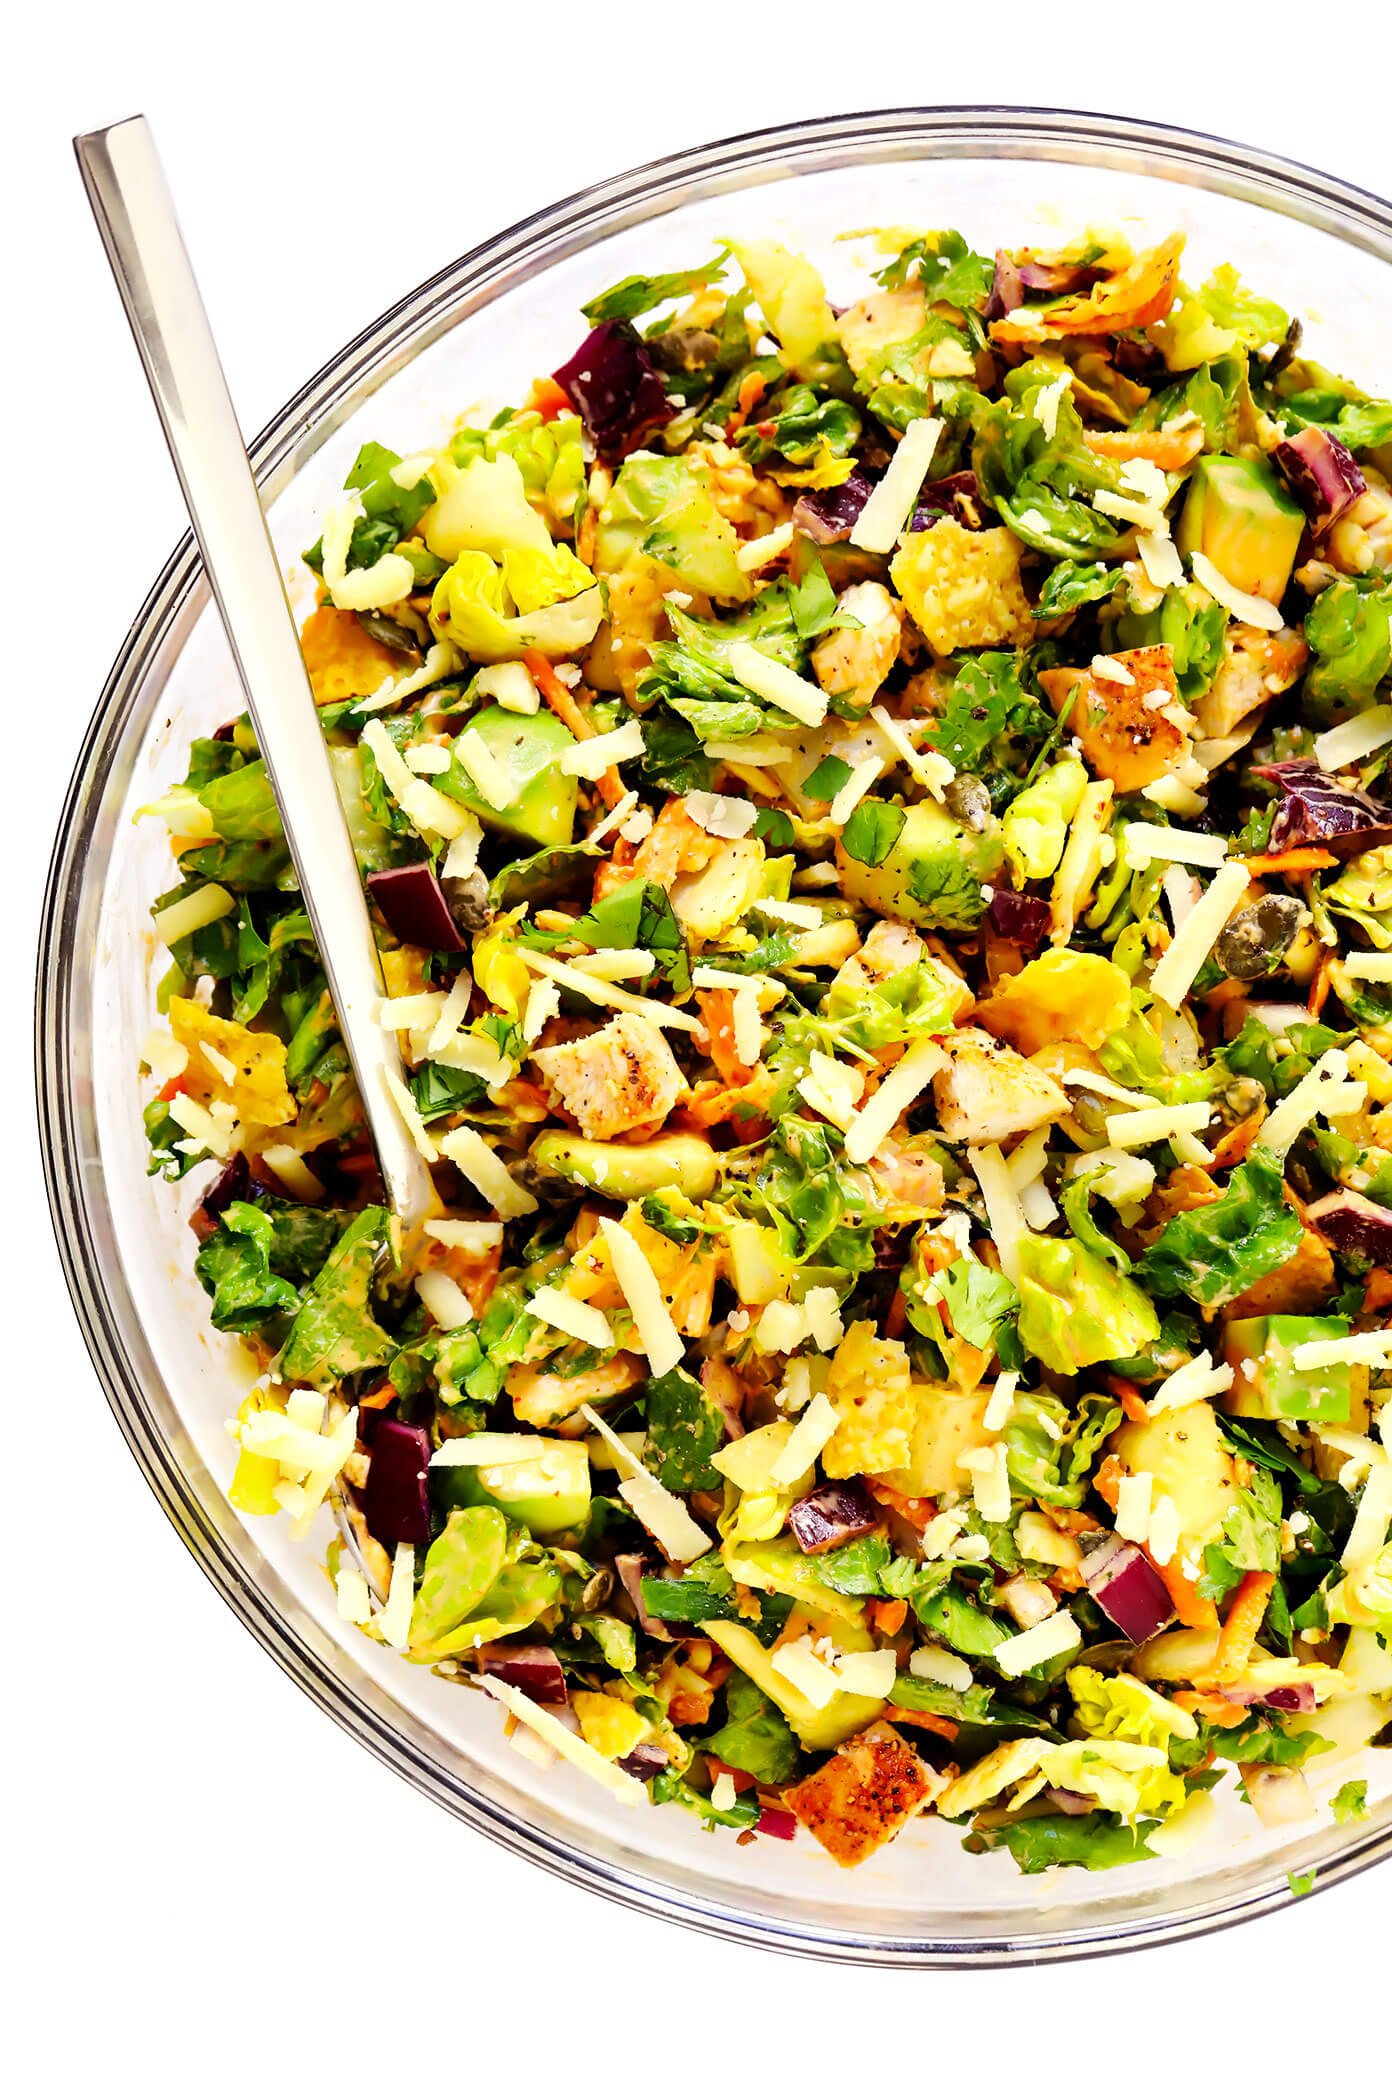 Chipotle Chicken Chopped Salad in Mixing Bowl